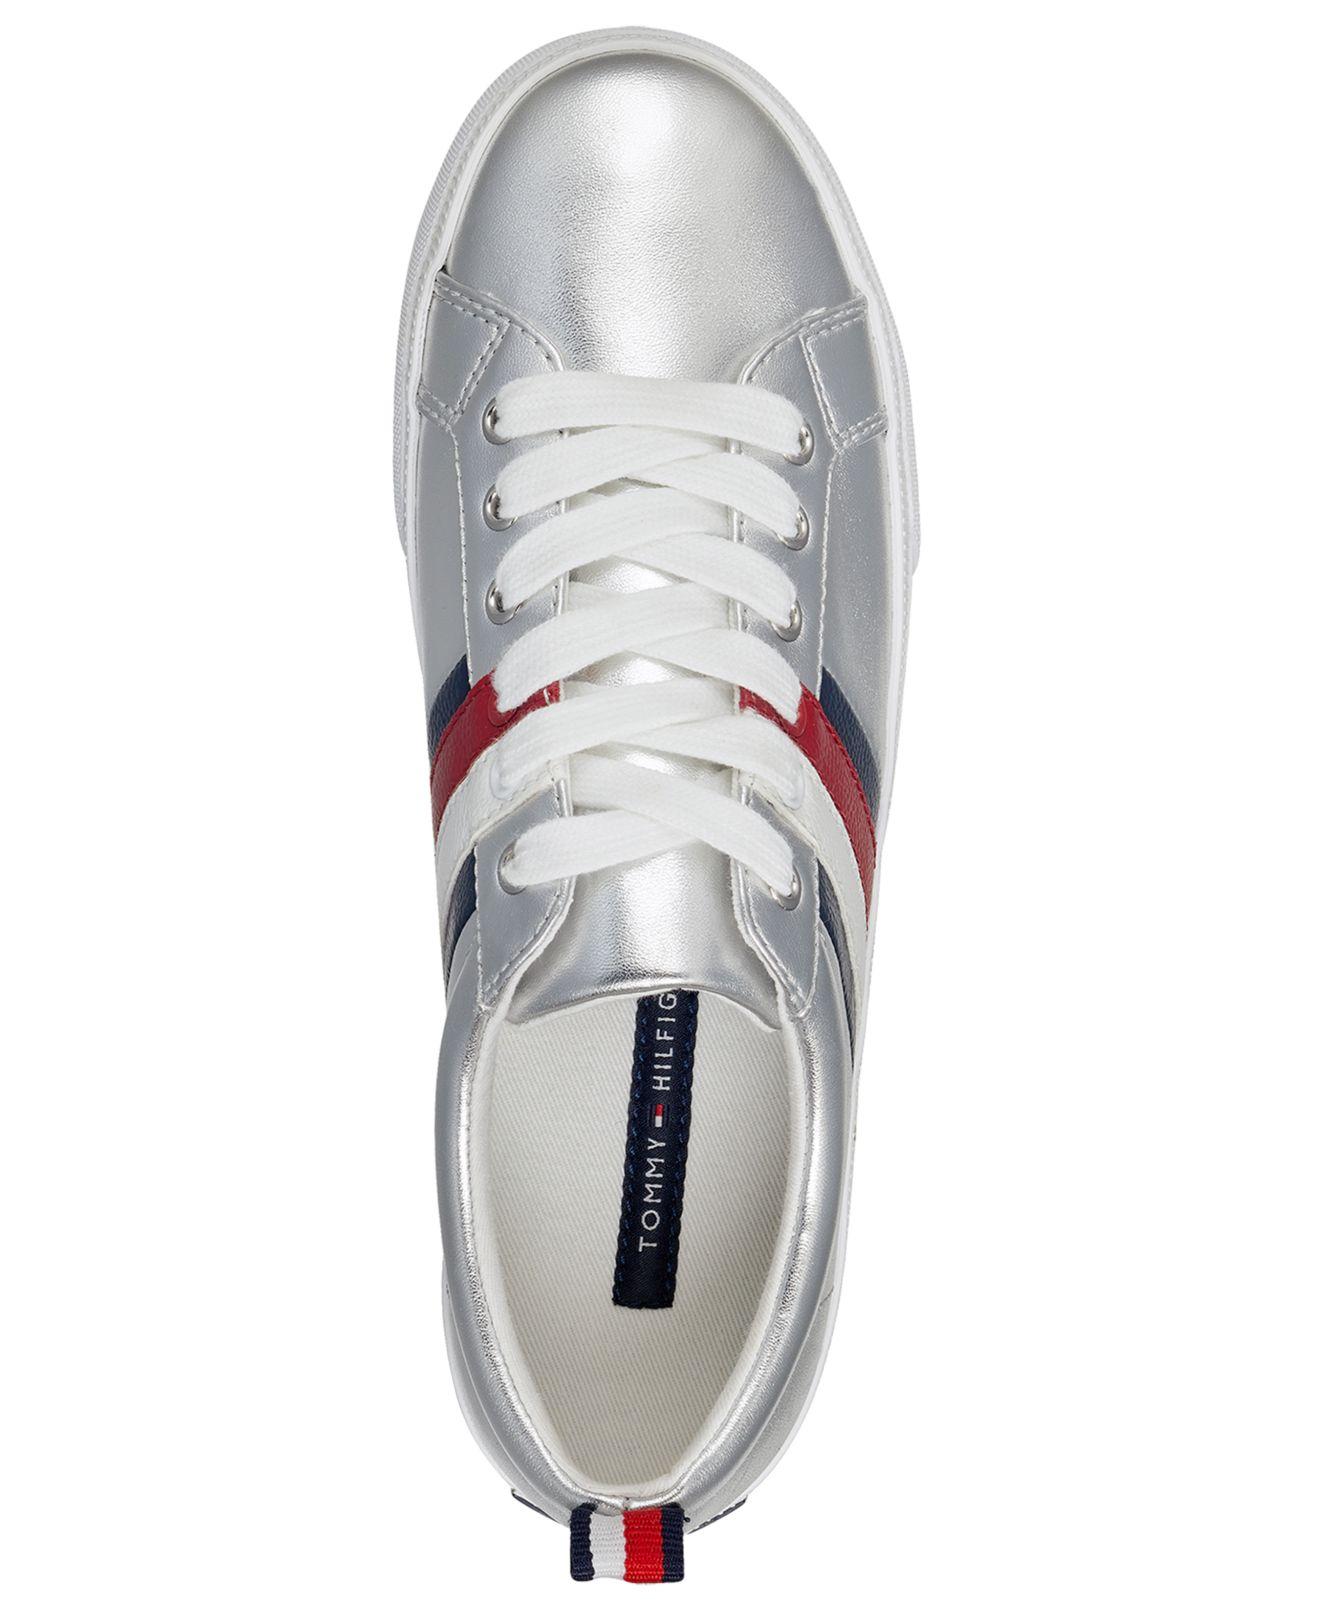 tommy hilfiger silver shoes